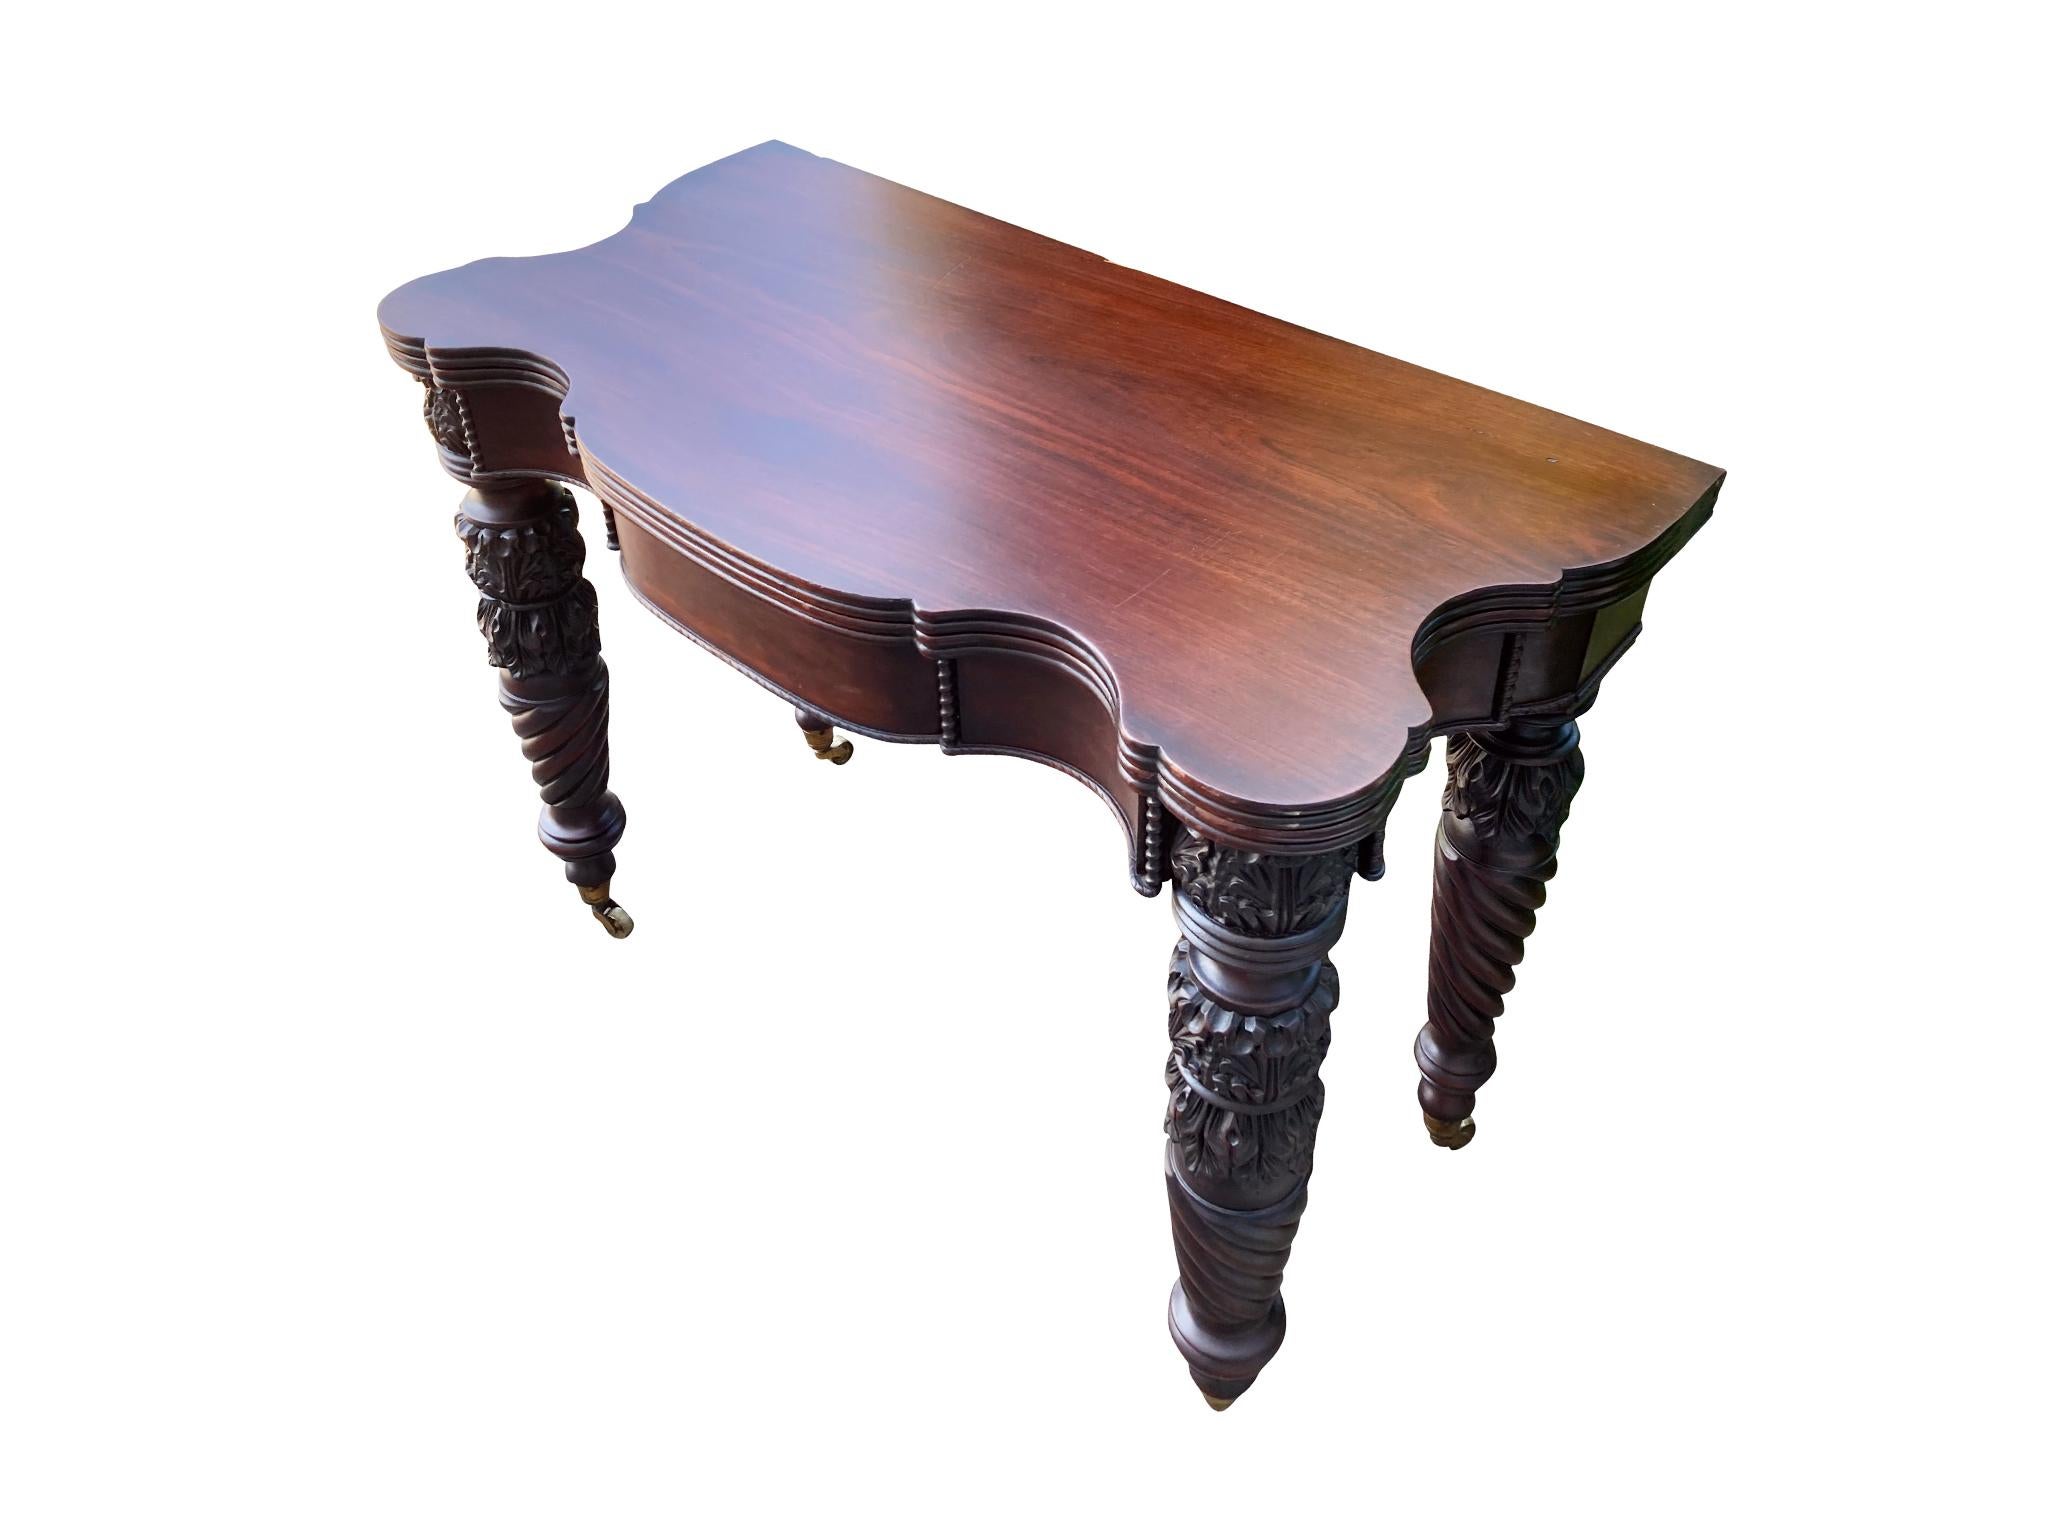 A set of two Federal mahogany folding card tables. Handcrafted circa 1825. They are a near-identical pair with the legs varying slightly in design. These tables are remarkable for their elegant features: the rounded molding of the tops, the